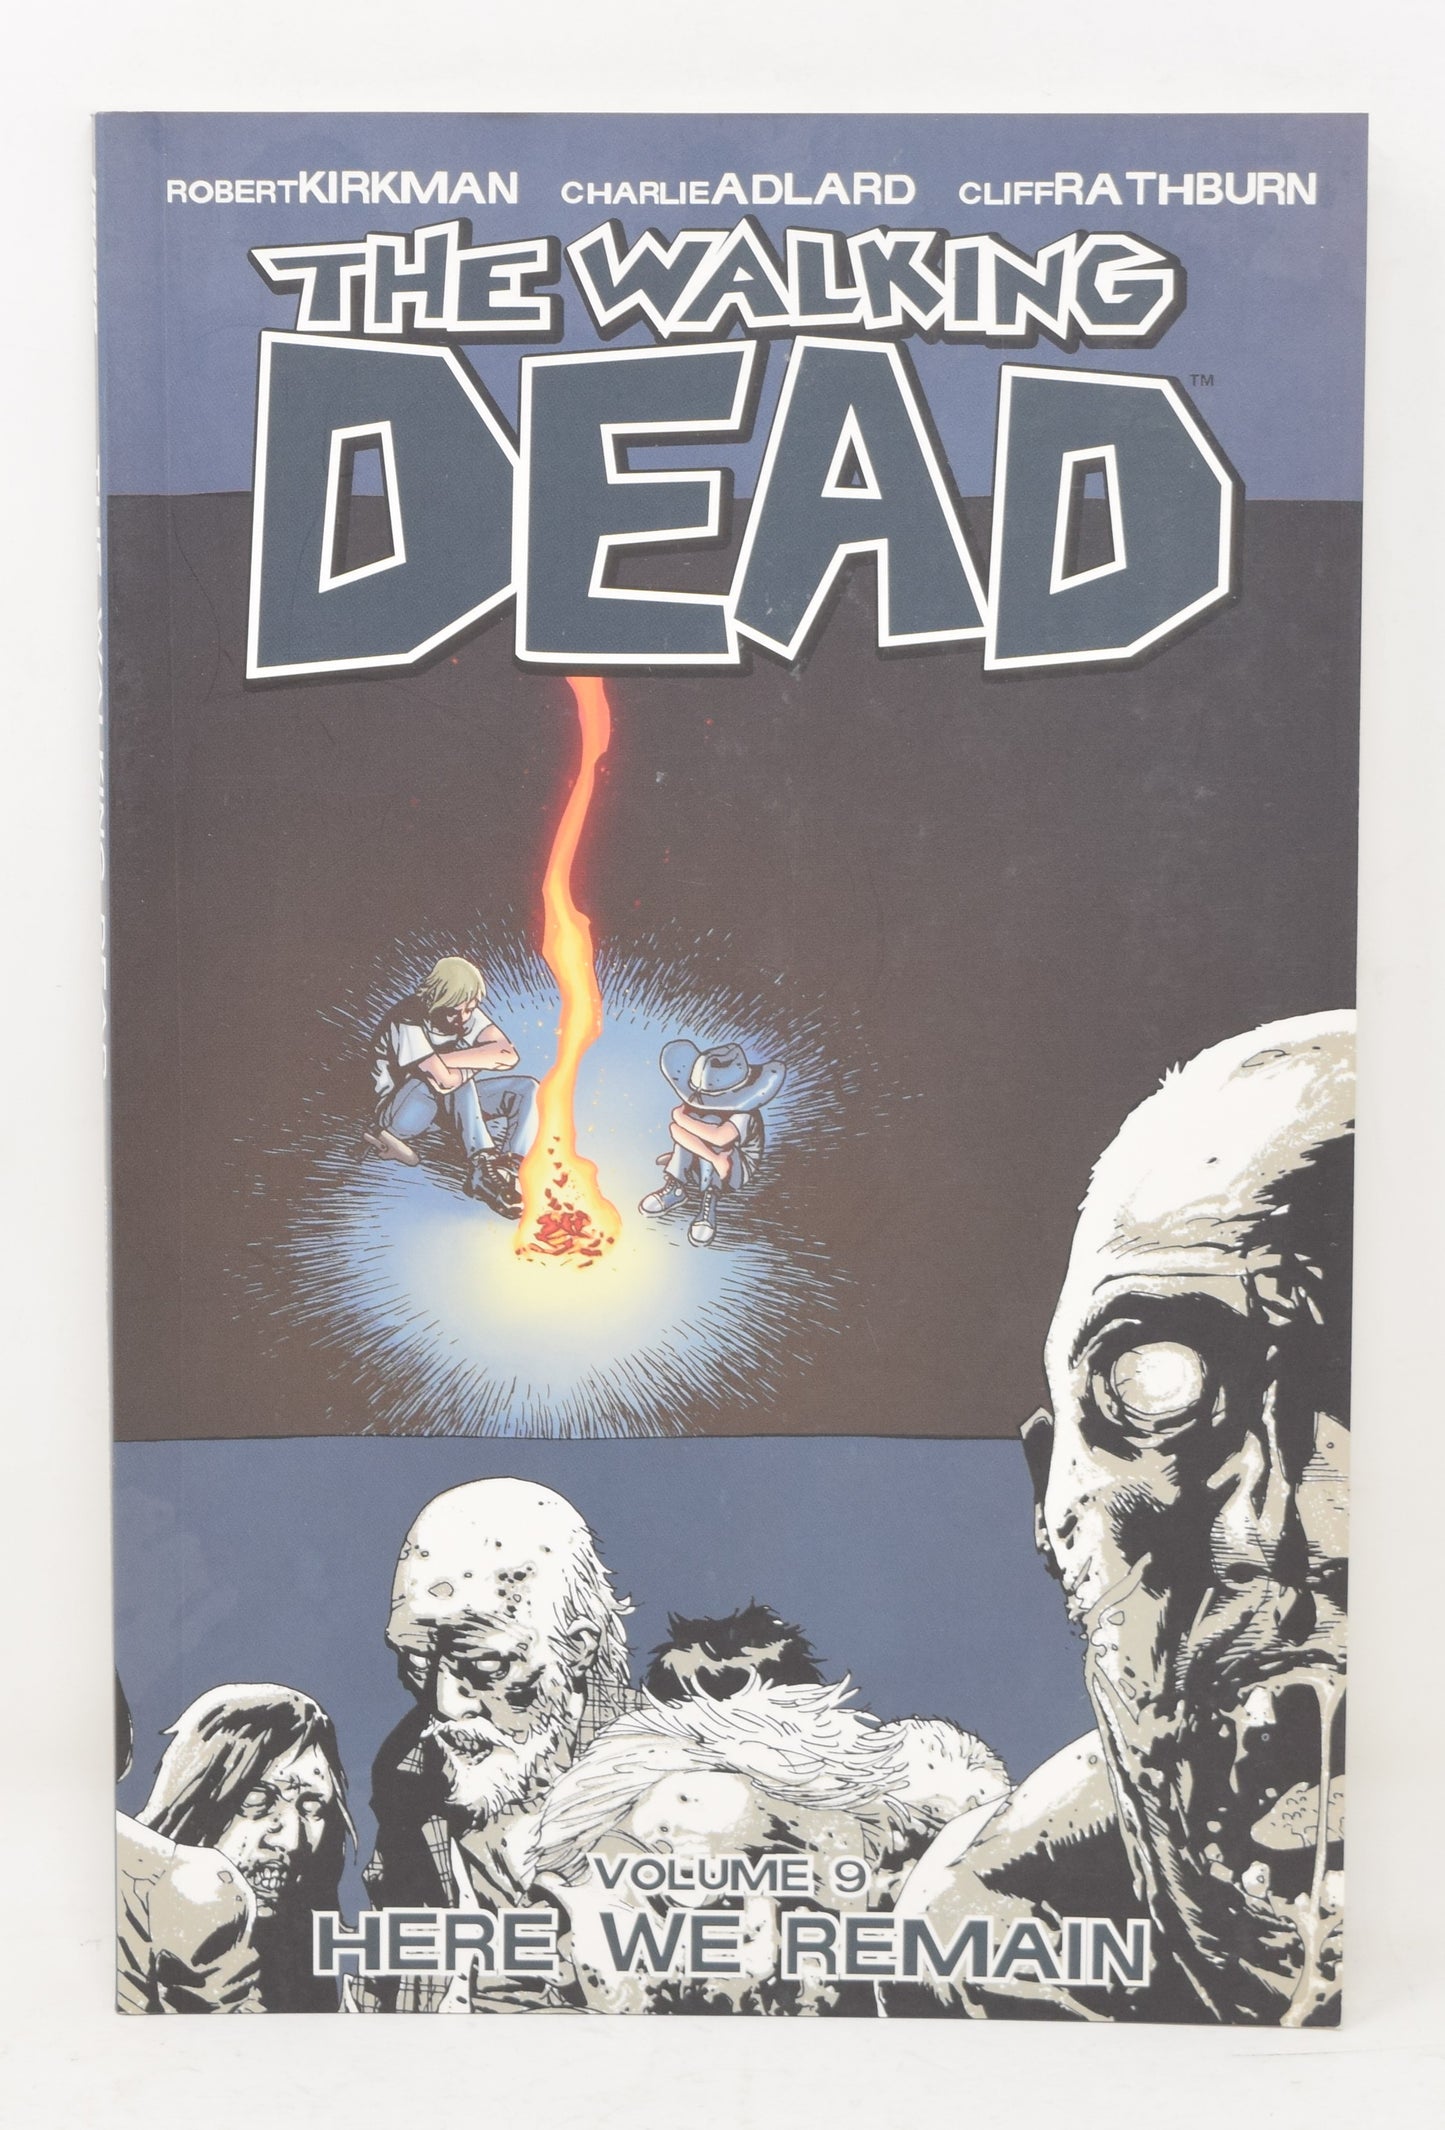 The Walking Dead Vol 9 Here We Remain 2nd Print Image 2009 GN NM New